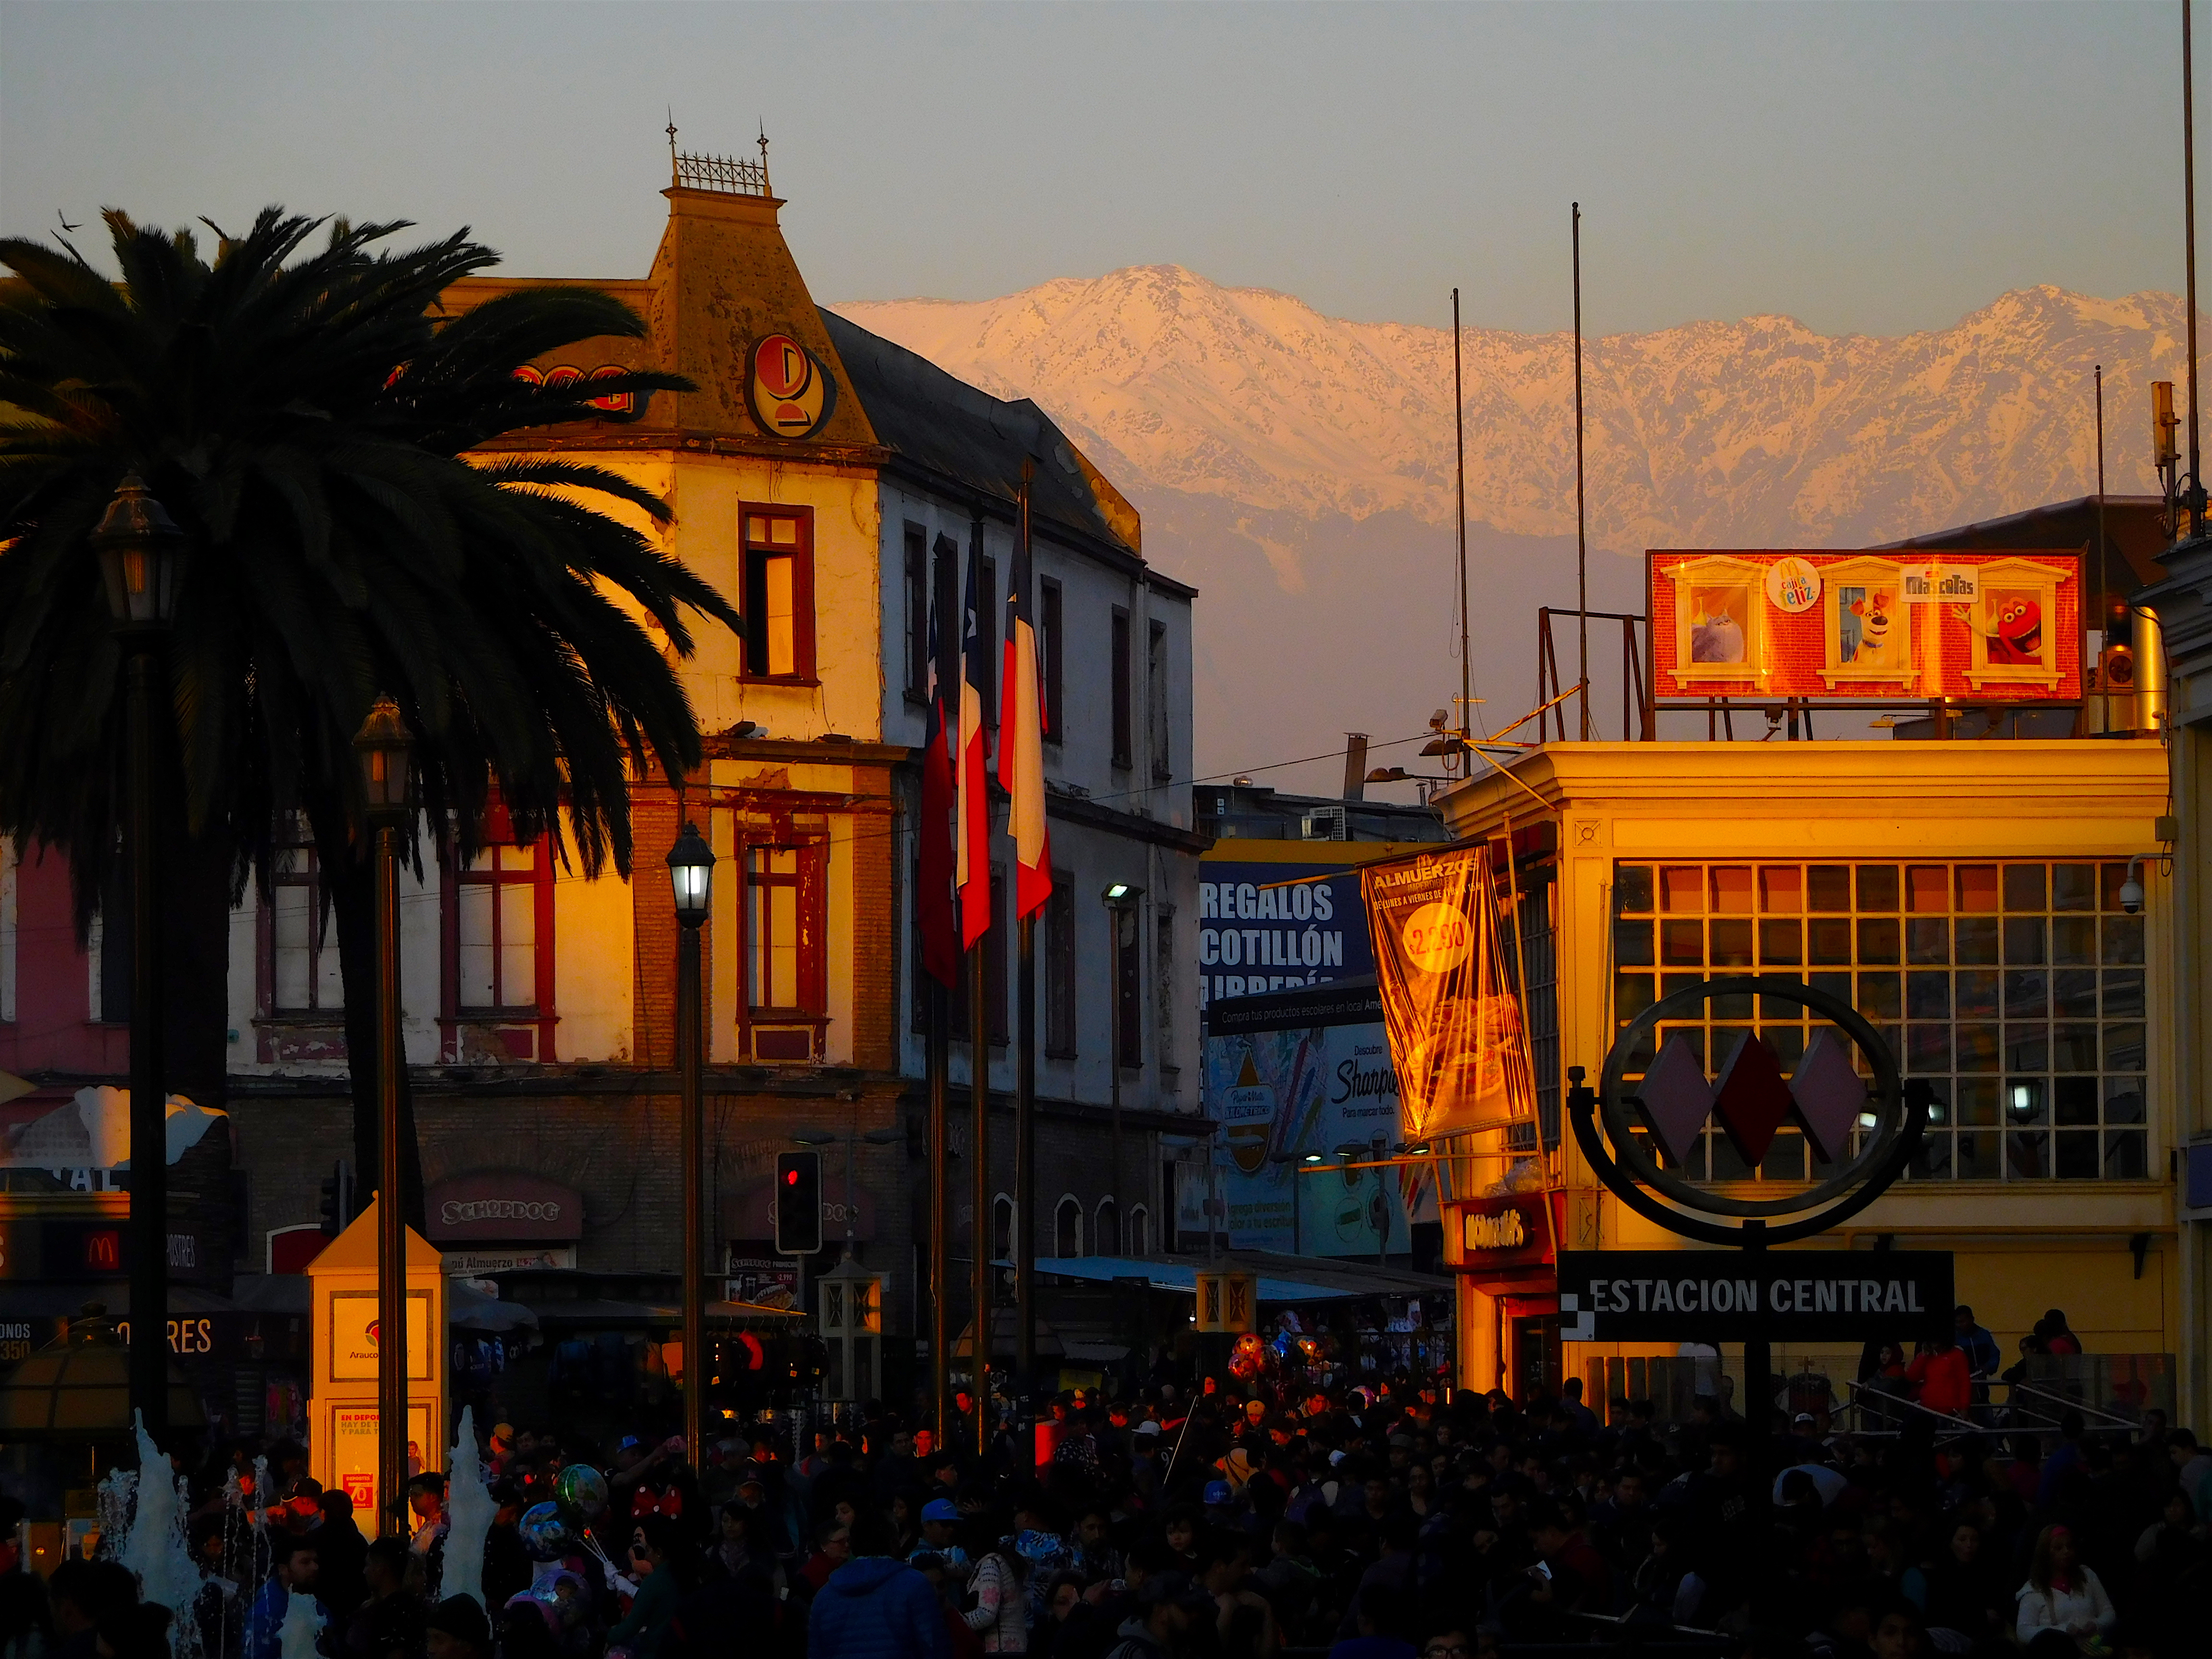 Alepnglow on the huge peaks that loom above Santiago's packed central train station area. photo: snowbrains